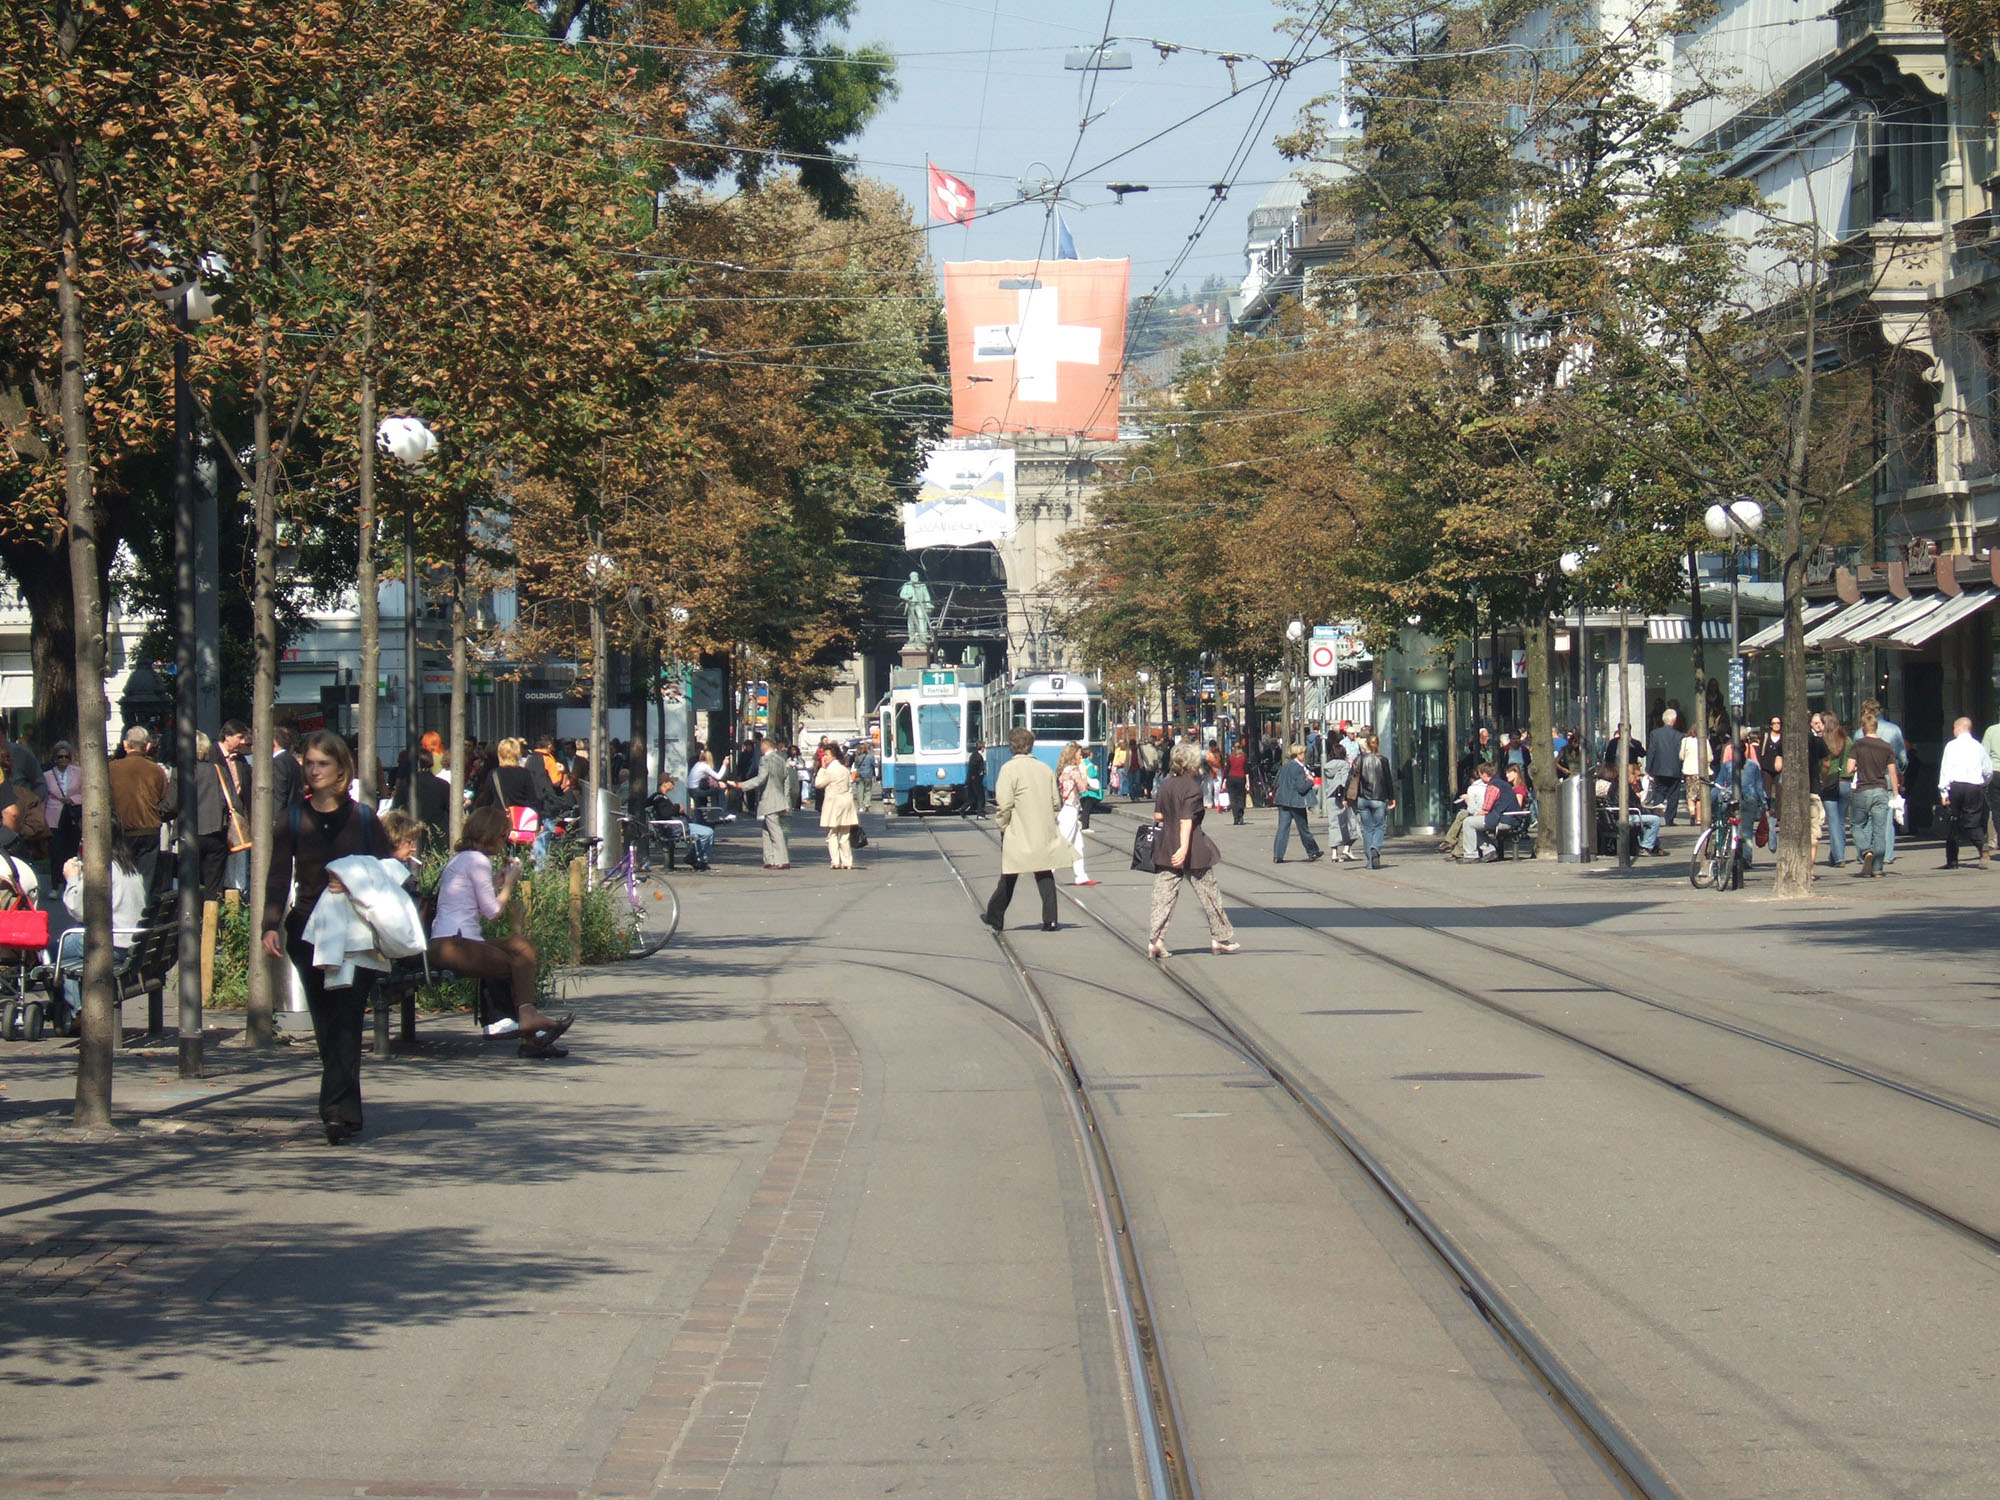 Fig. 22.34 Examples of successful transit malls include central Zurich, where the tram system provides easy access to shops, offices, and restaurants.